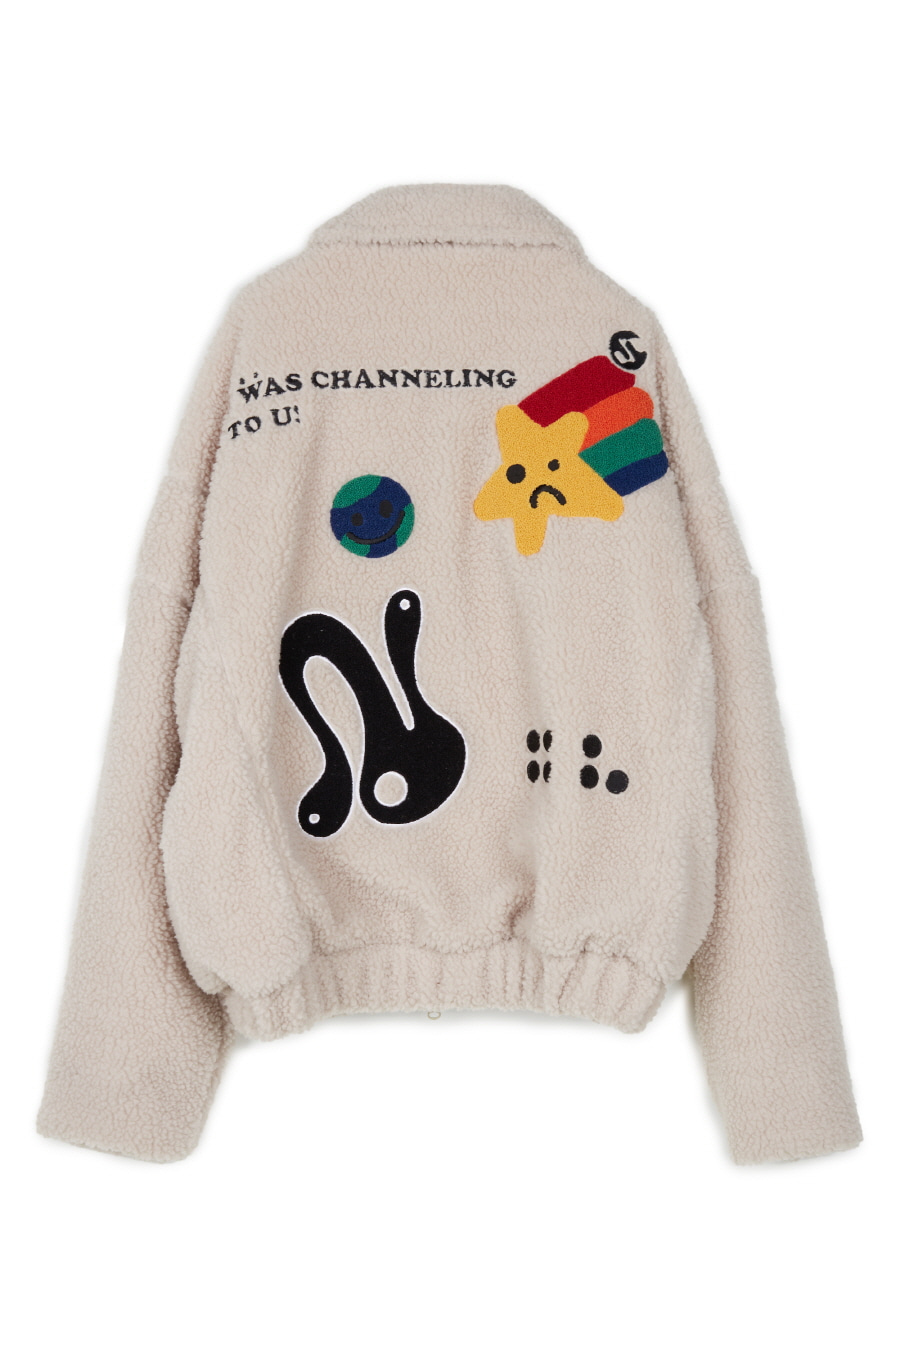 Shooting Star Embroidered Sherpa Fleece Jacket - Ivory